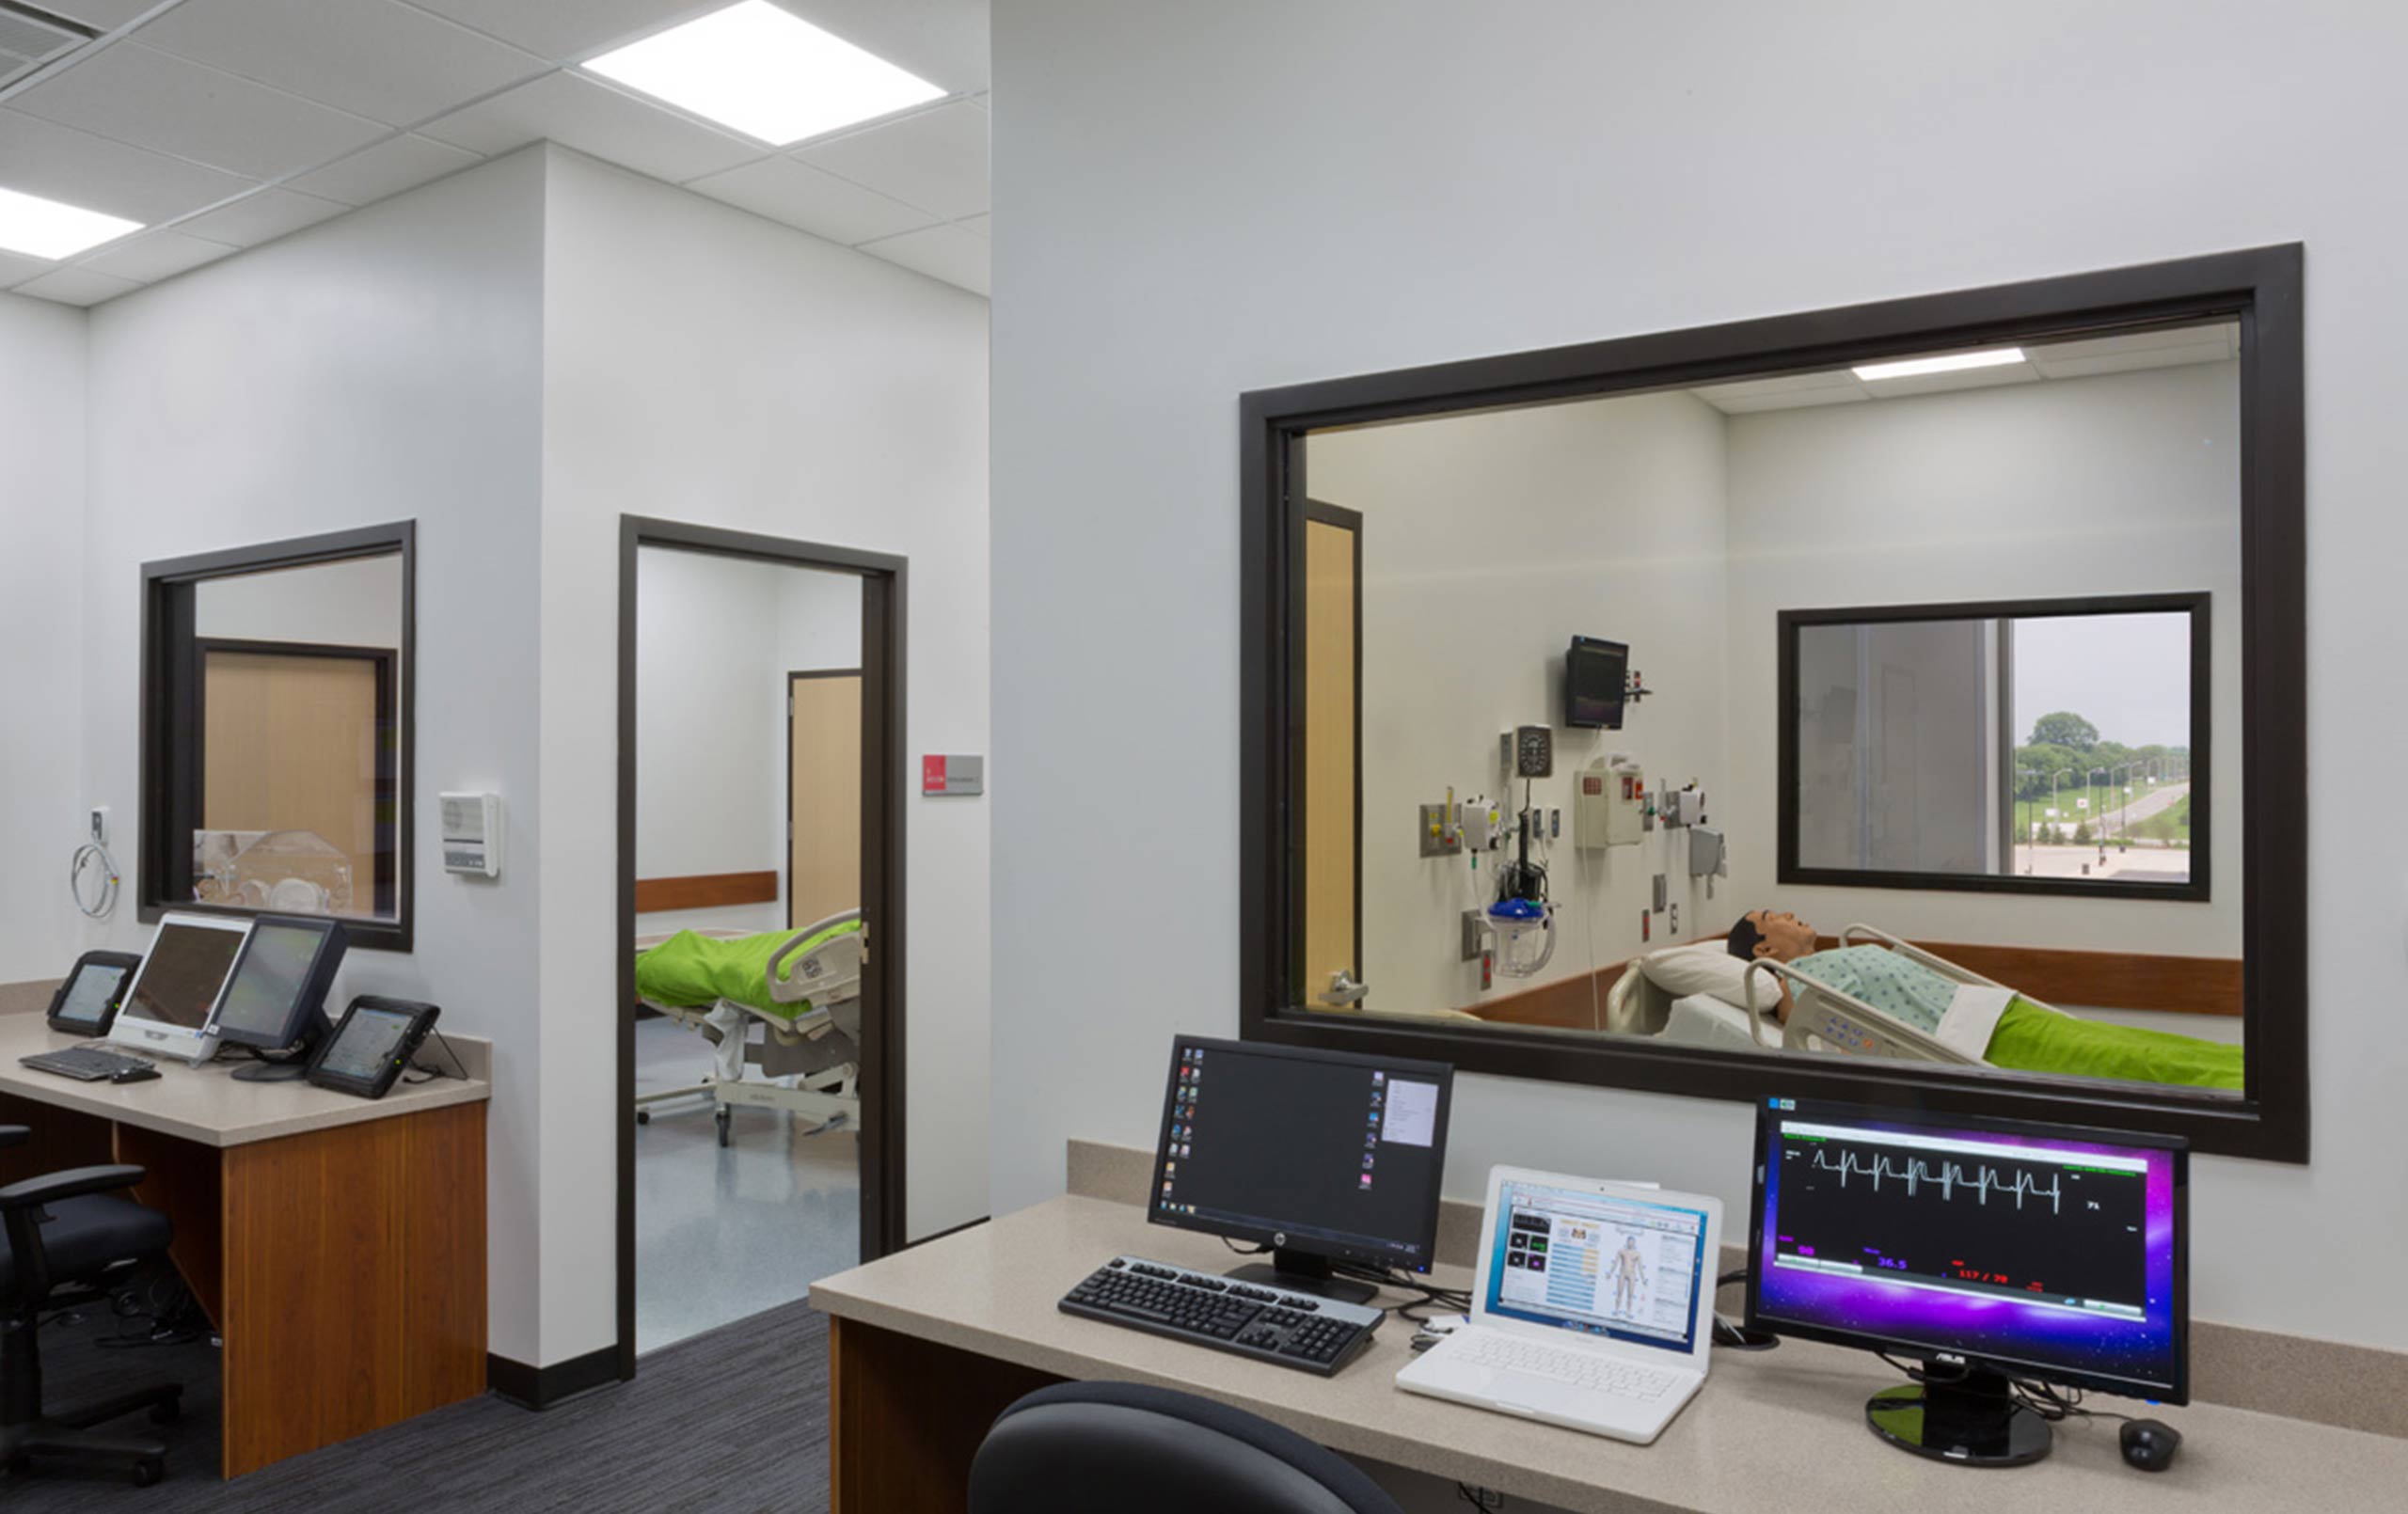 Higher education simulation lab with viewing window